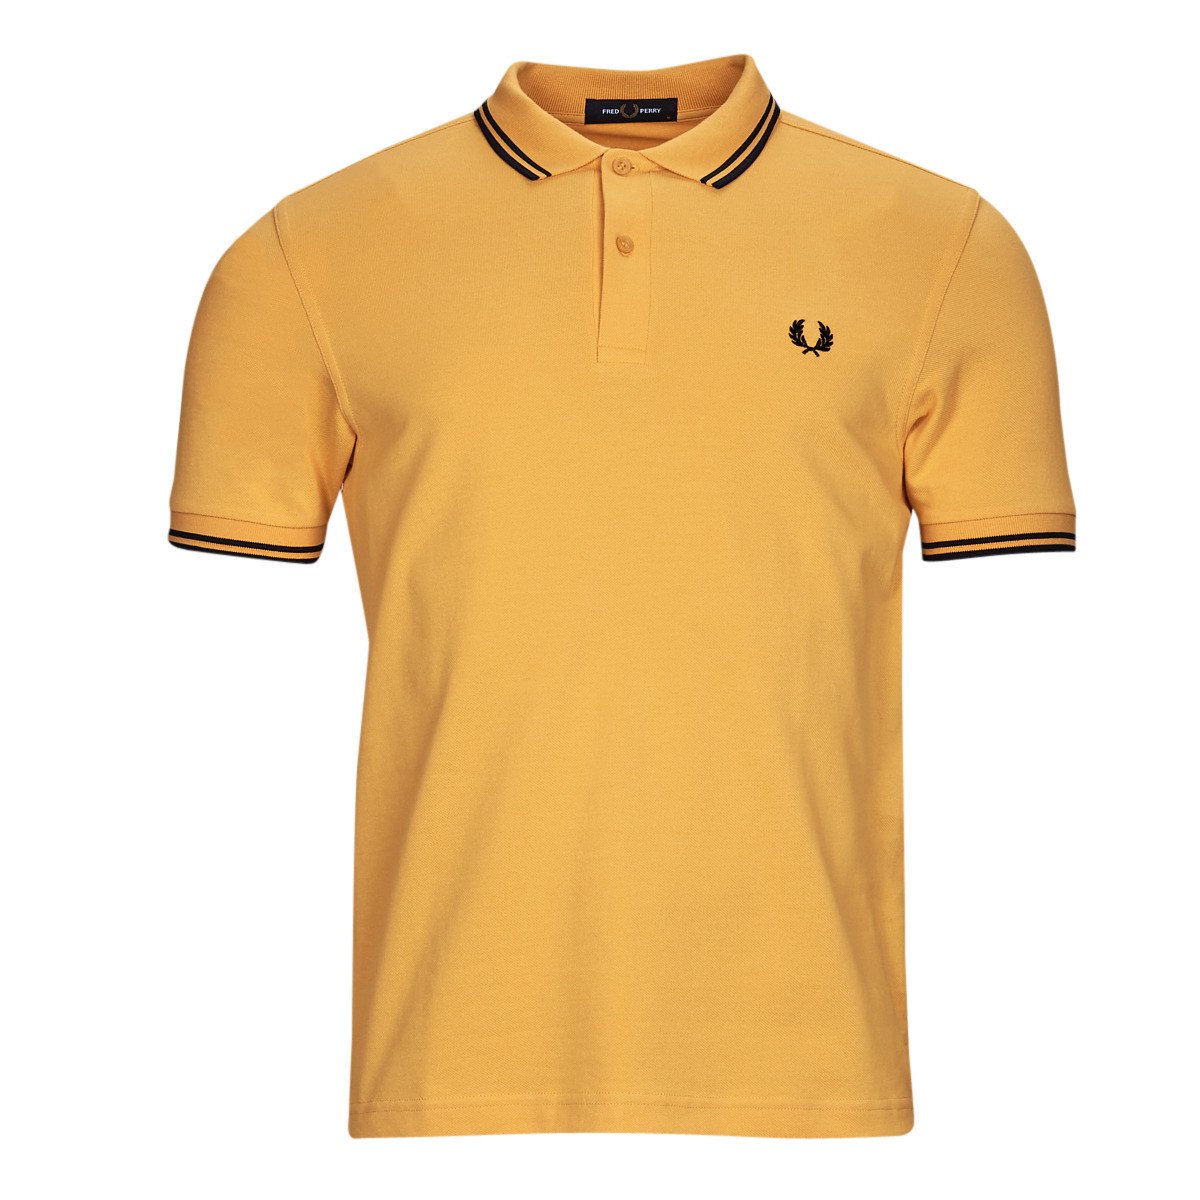 Fred Perry  TWIN TIPPED FRED PERRY SHIRT  Žlutá